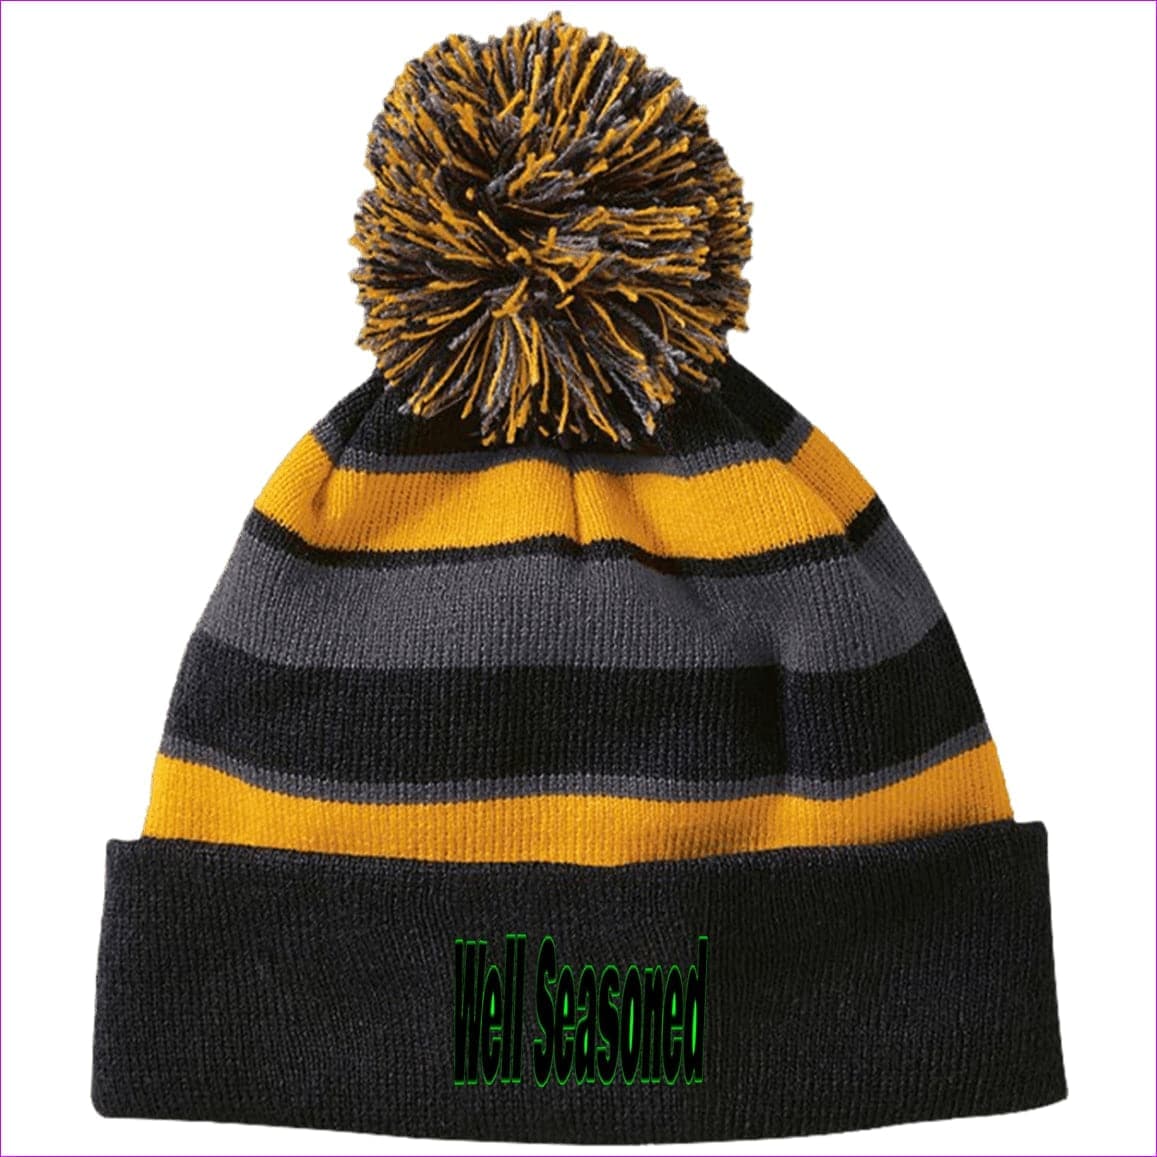 Black/Light Gold One Size Well Seasoned Embroidered Holloway Striped Beanie with Pom - Hats at TFC&H Co.